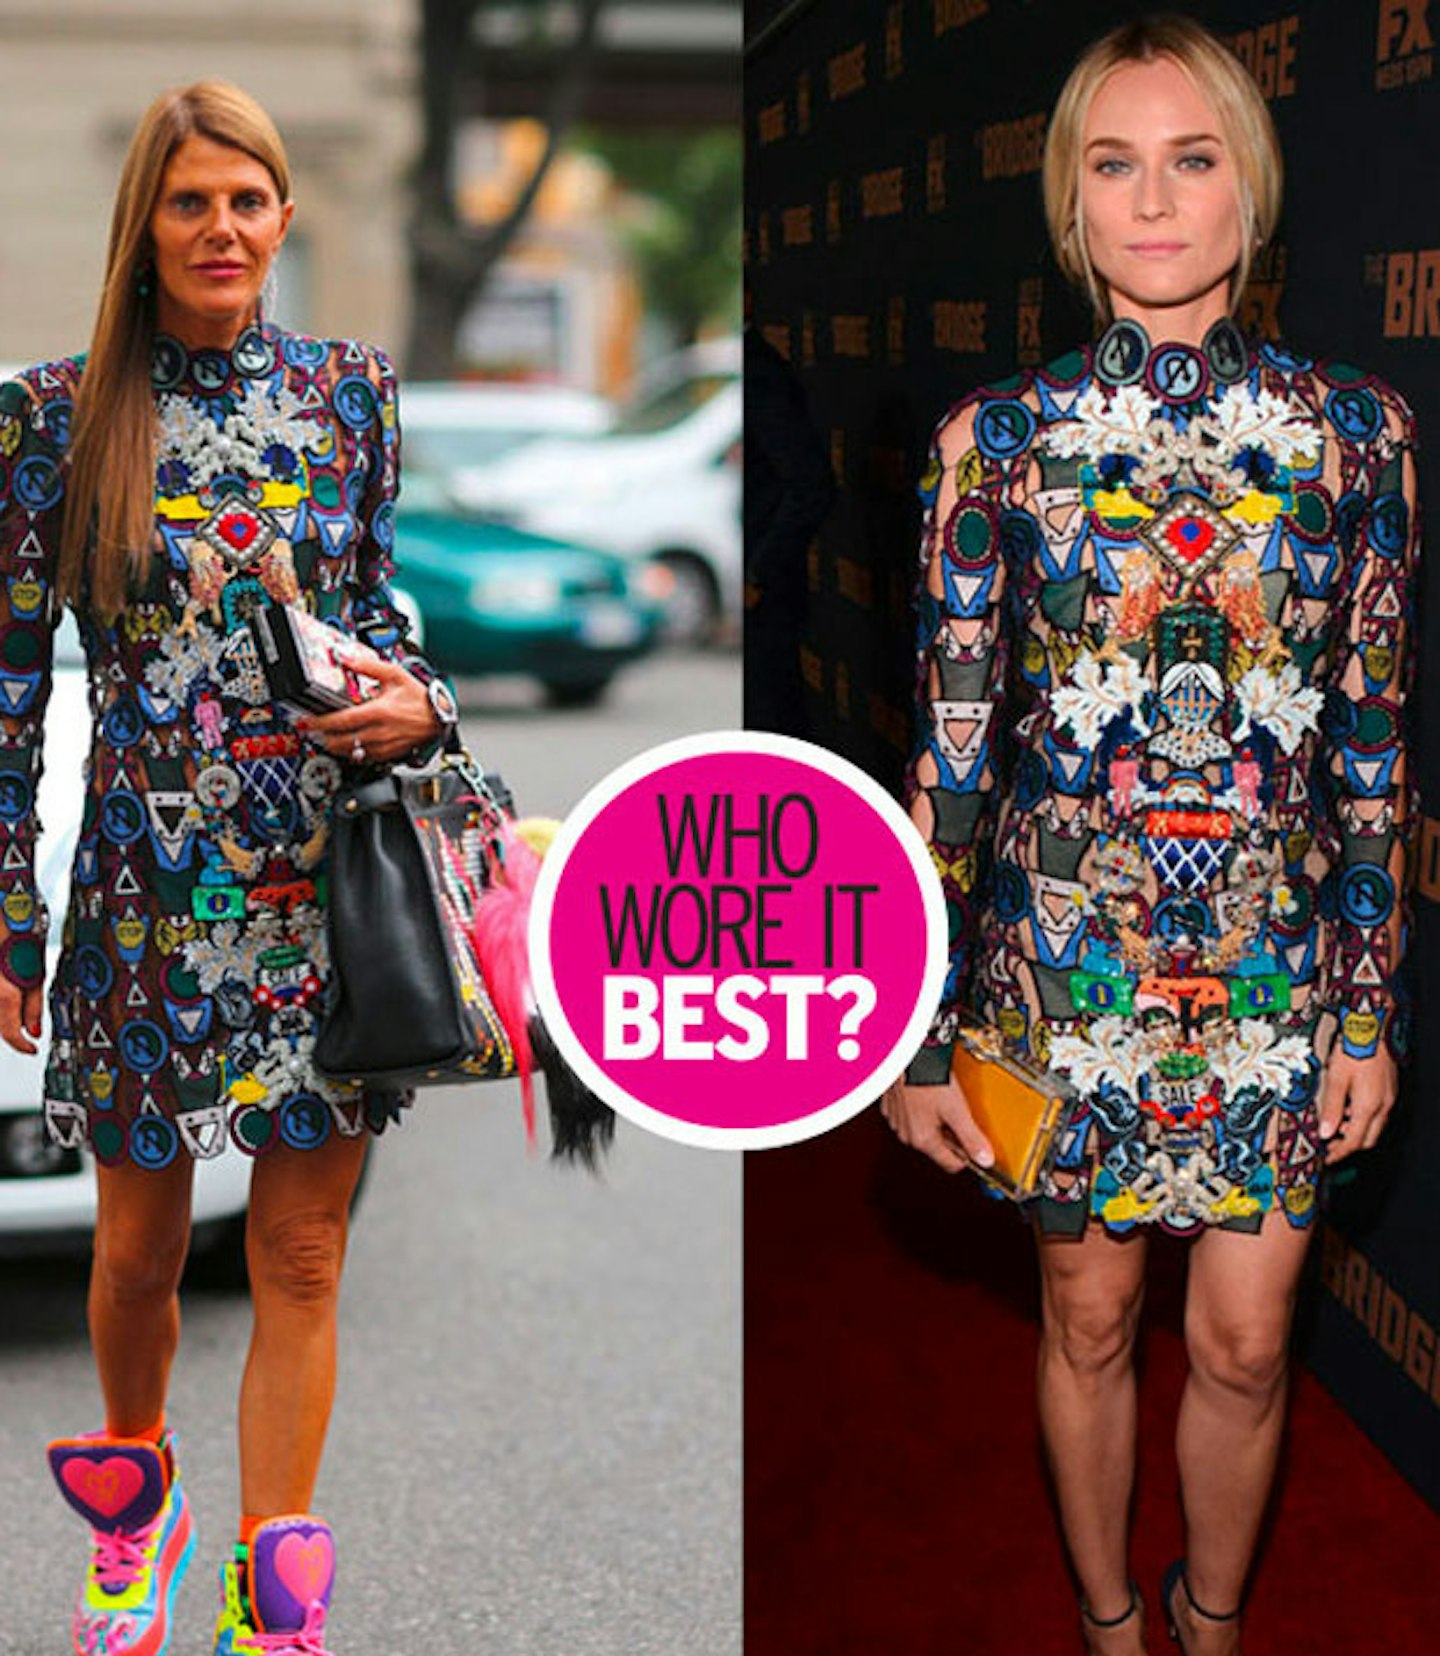 One dress, two ways: Rihanna or Anna dello Russo's assistant